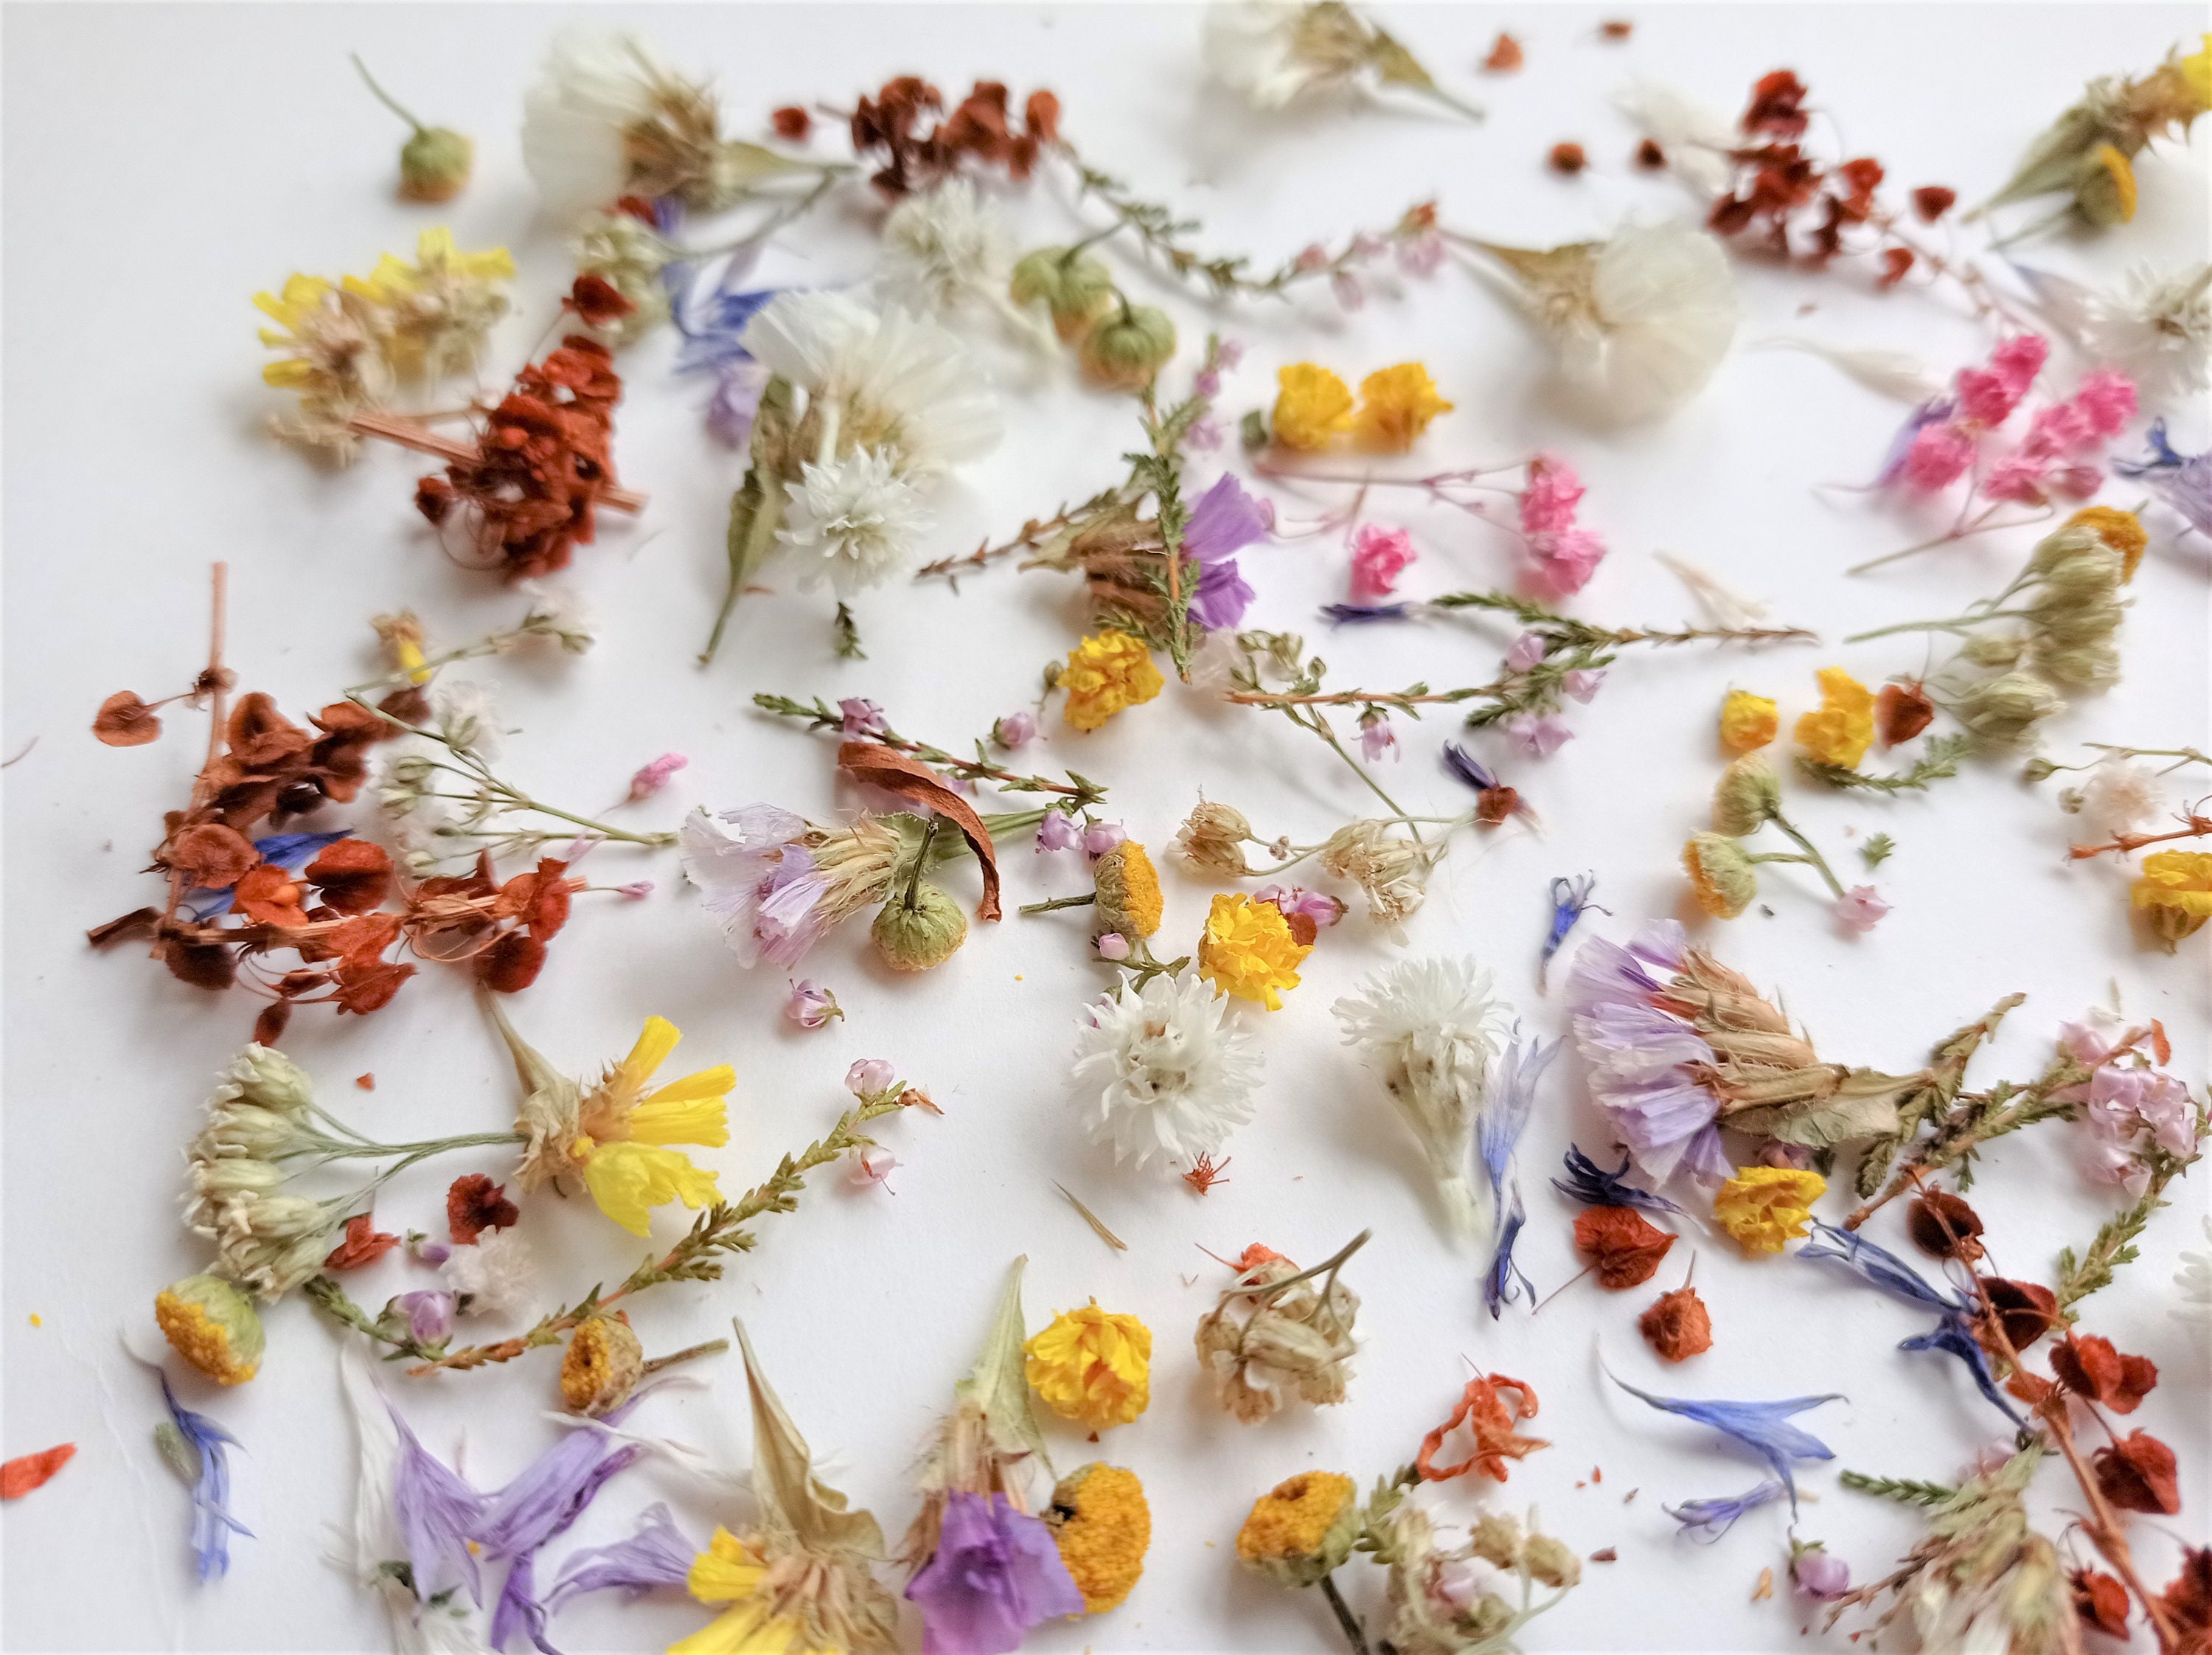 850 PCS Small Dried Daisy Flowers for Resin - Mini Dried Flowers for Nails  Art Decor, Natural Real Tiny Dried Pressed Flowers for Crafts Resin Jewelry